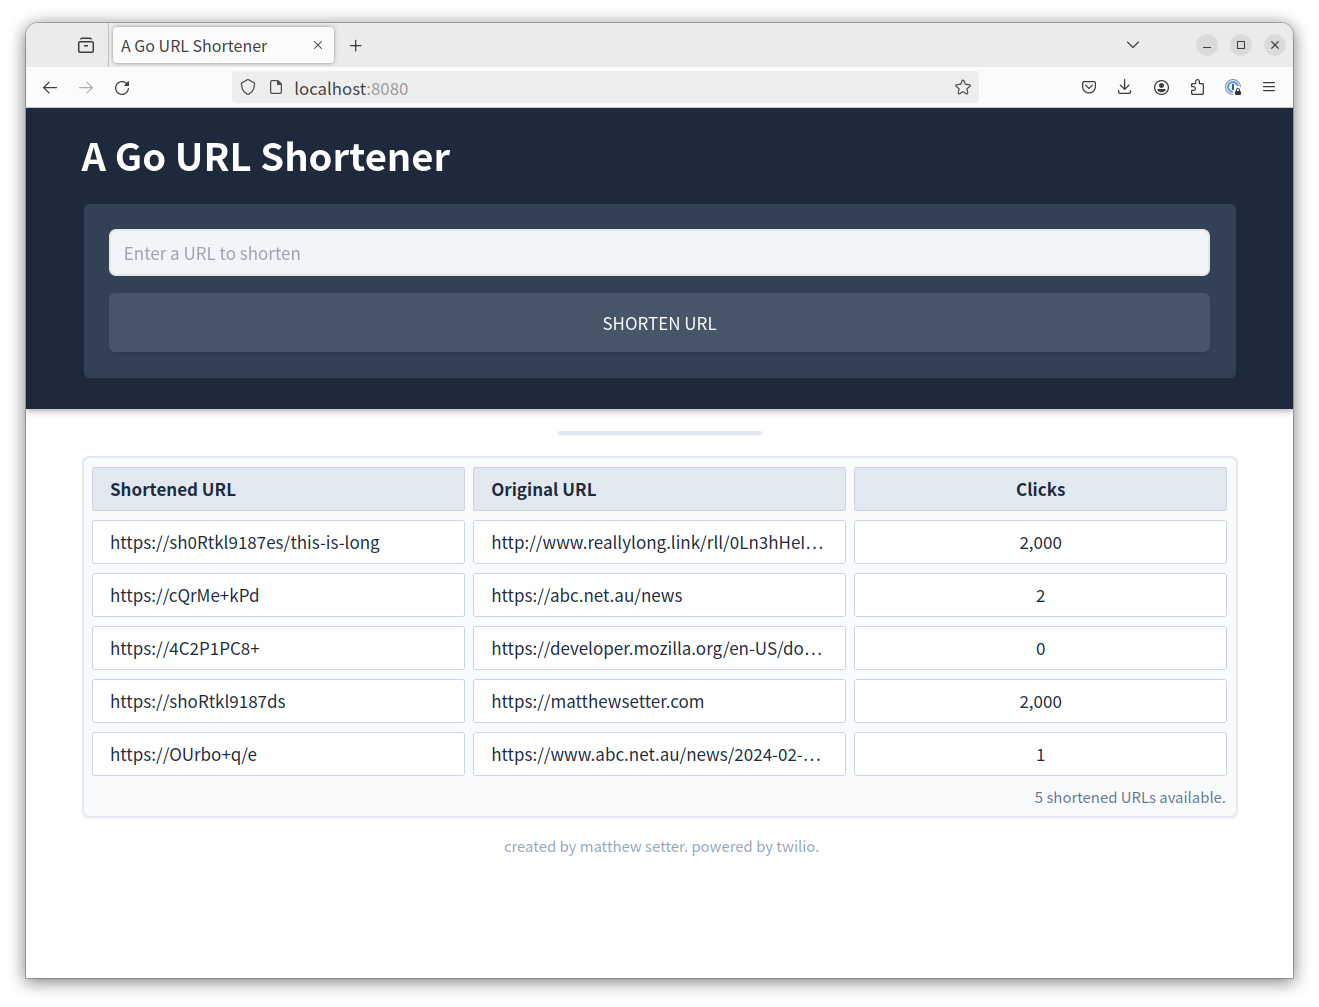 A screenshot of the URL shortener, showing the form at the top and a series of shortened URLs in a table underneath the form.